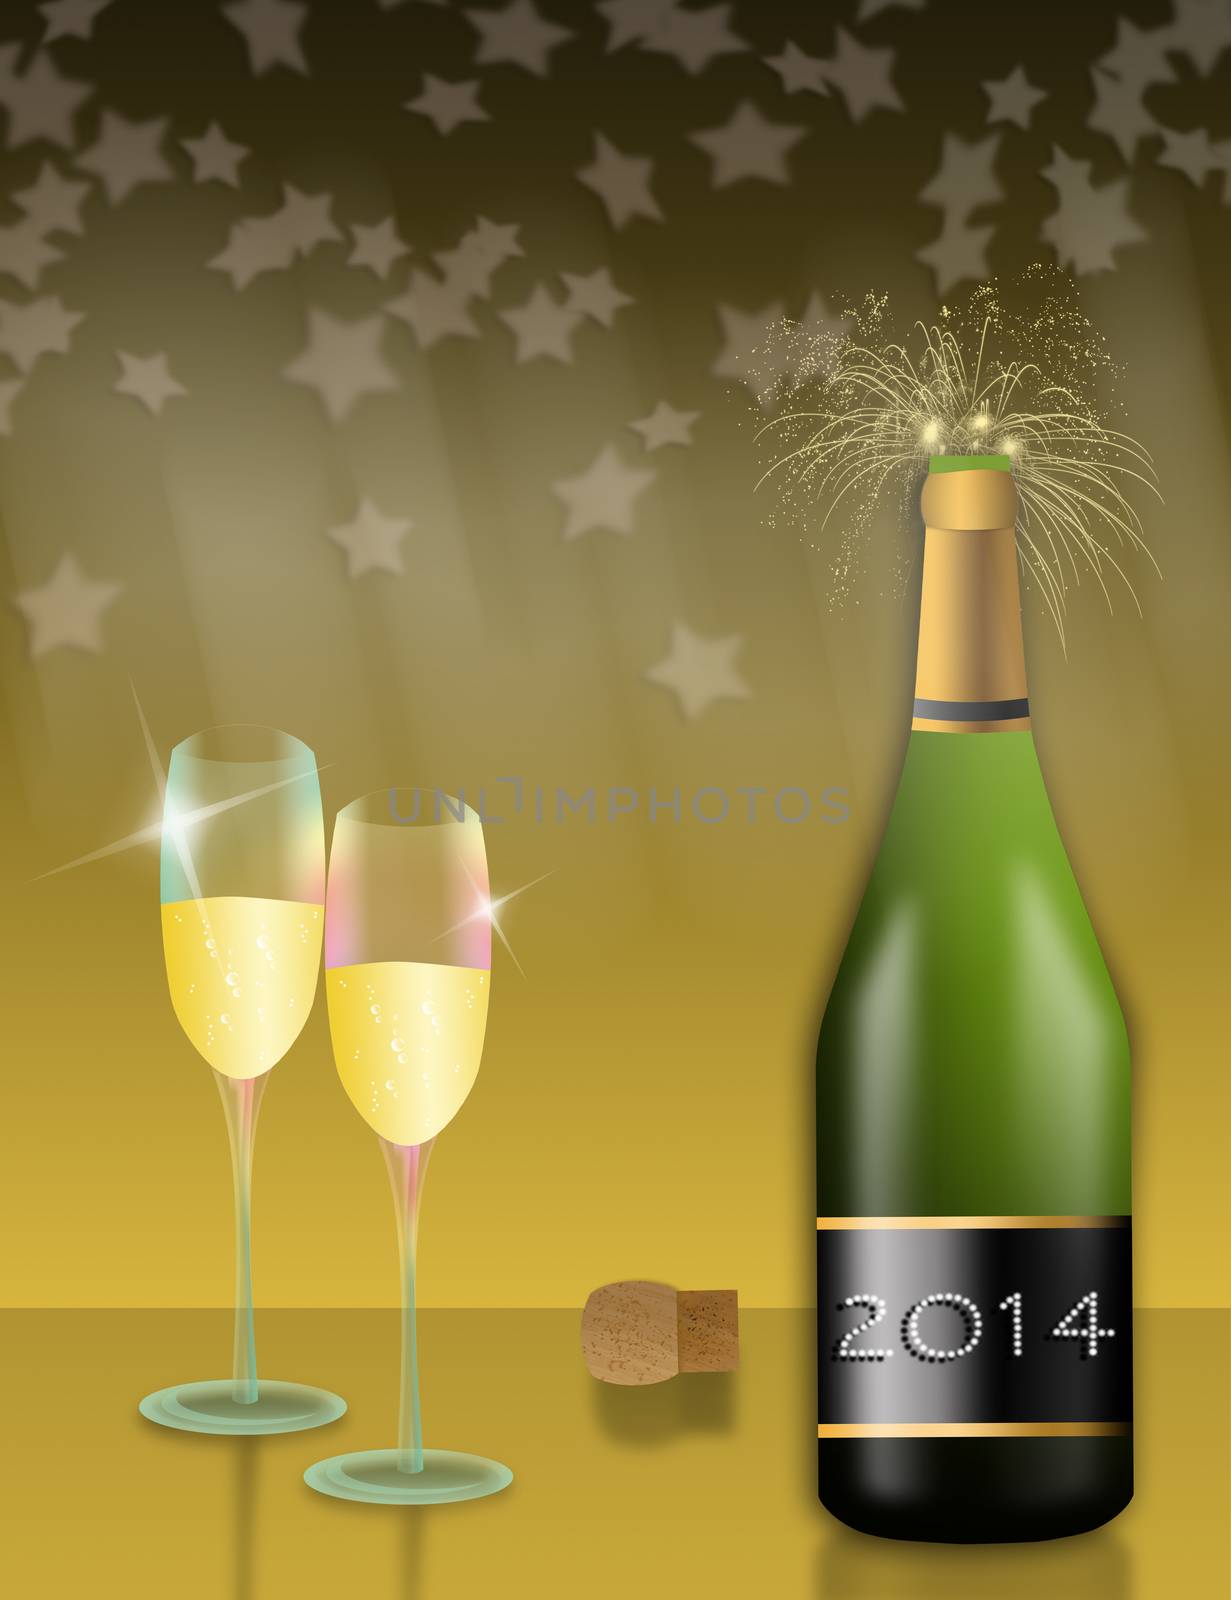 toast to celebrate the new year